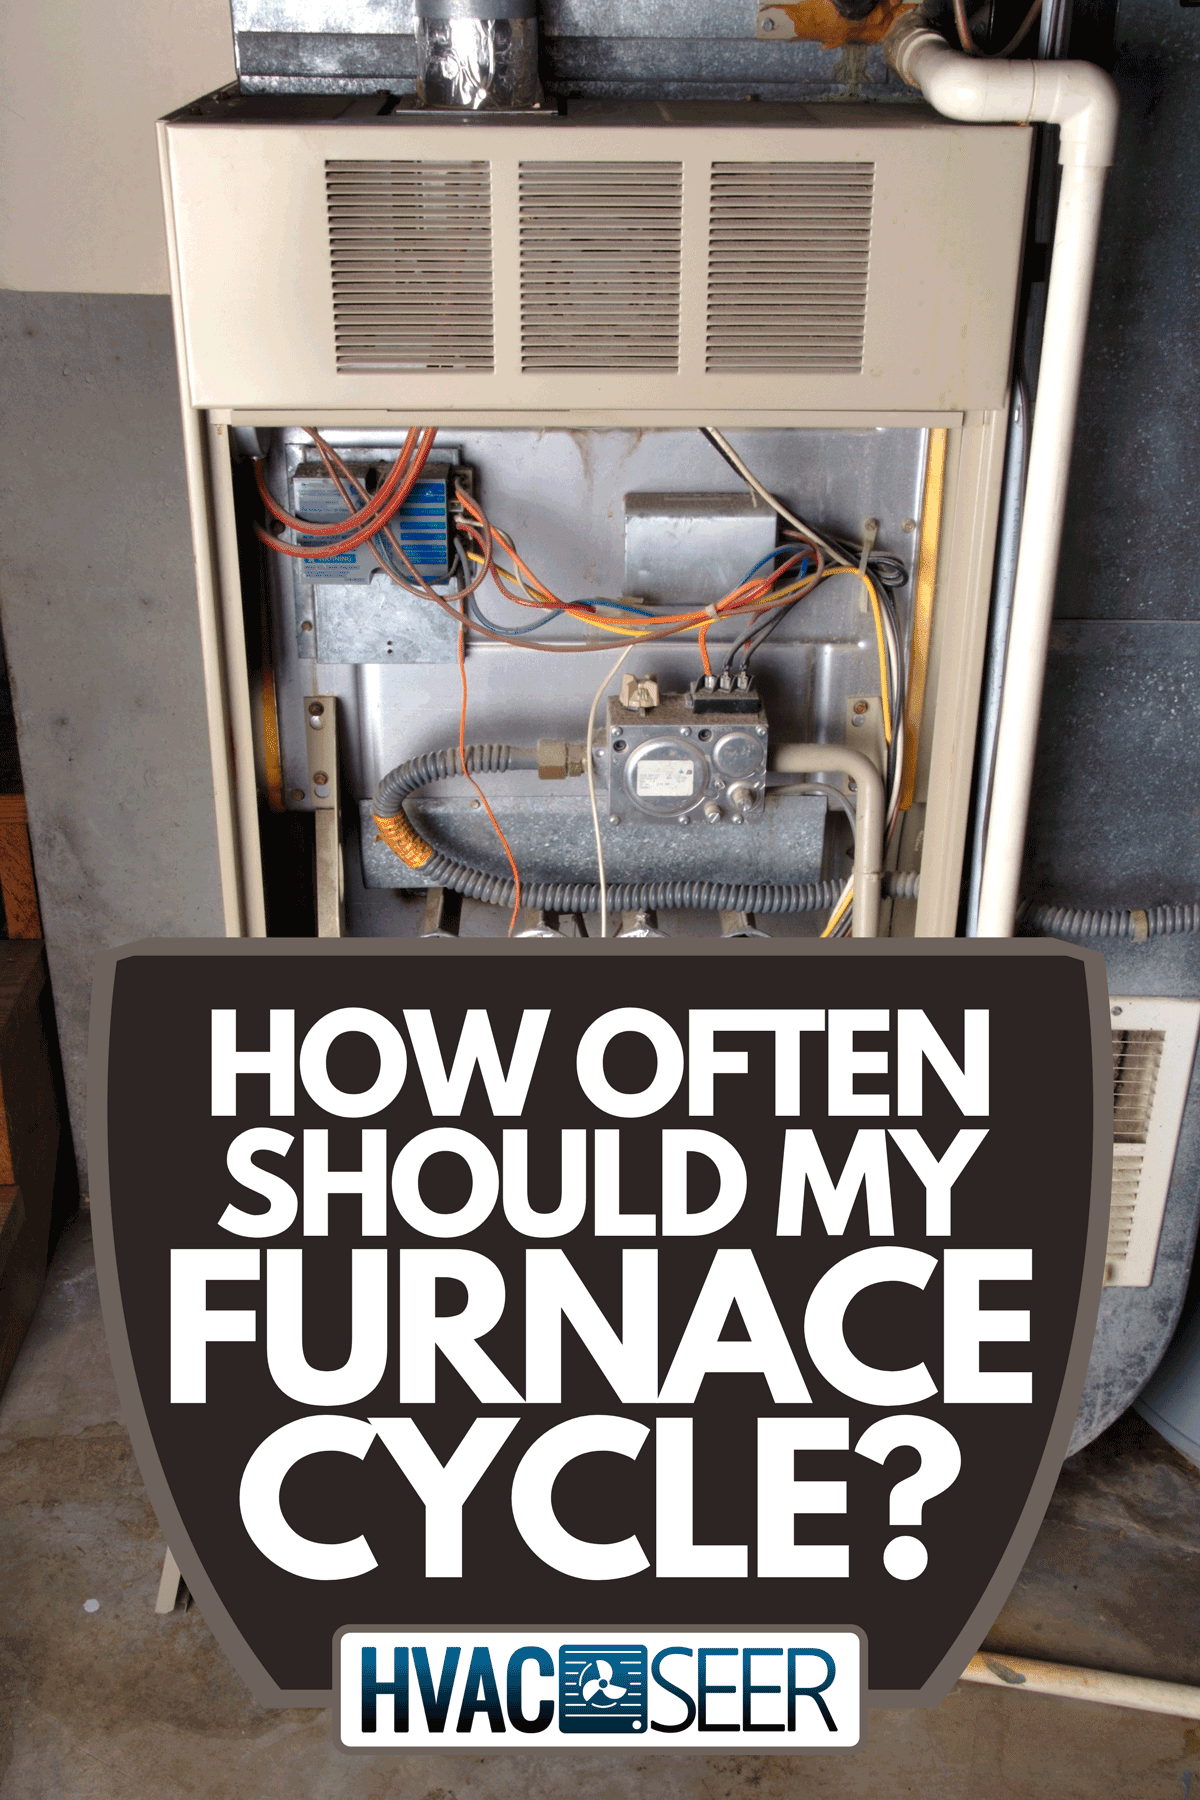 Home basement furnace unit, How Often Should My Furnace Cycle?